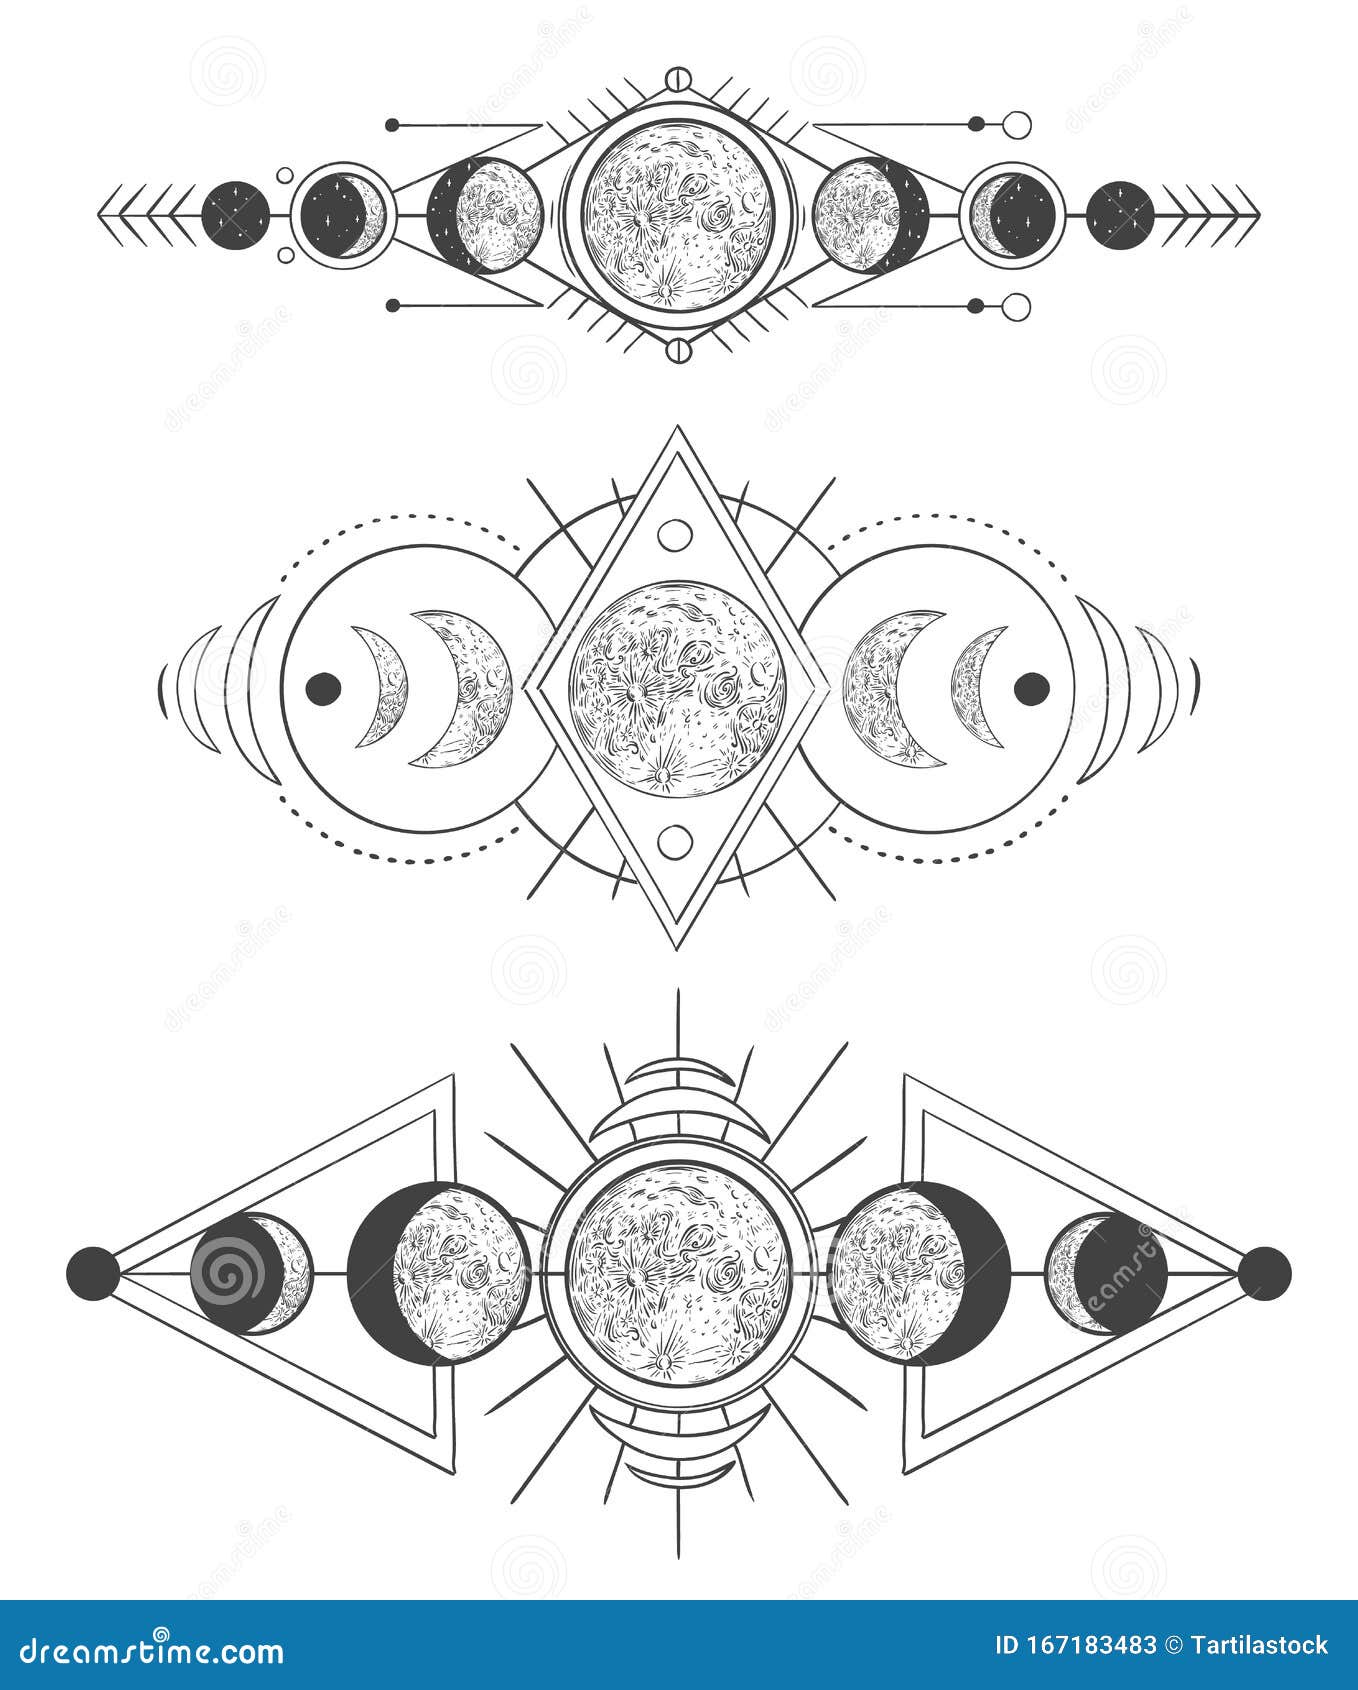 moons phases in mystic sky. mother moon, hand drawn pagan tattoo or sketch wicca moon goddess   set